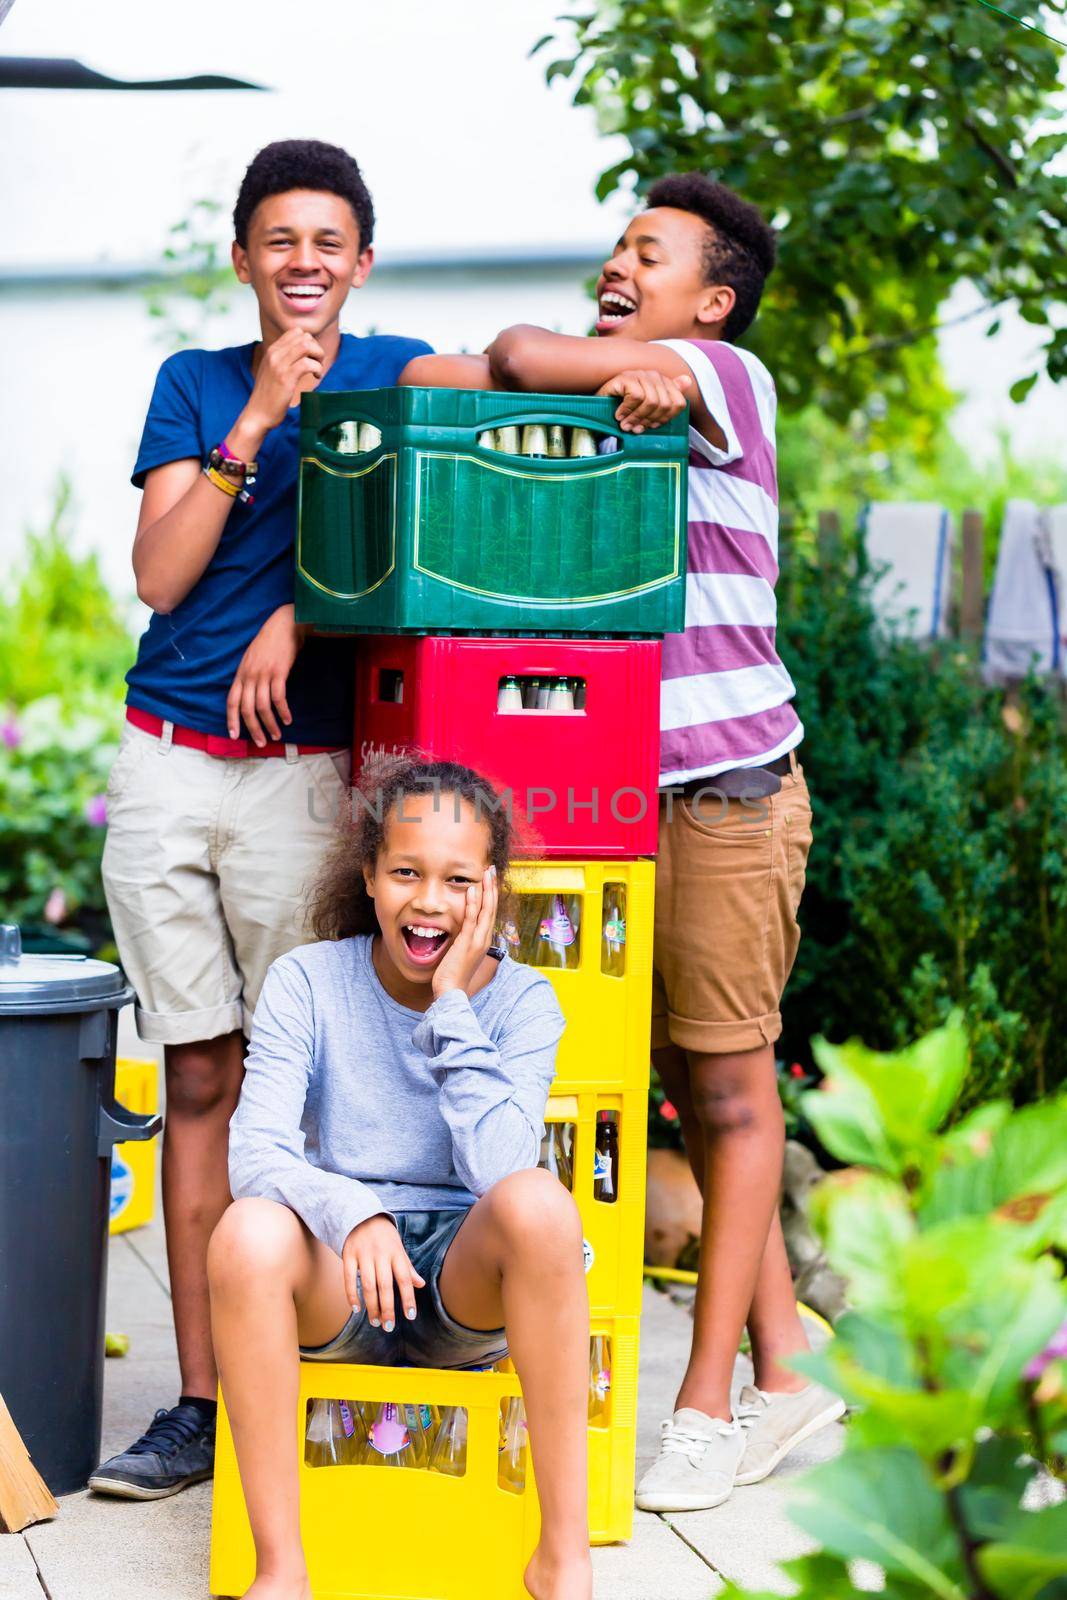 Portrait of happy kids near the colorful bottles crate in the park